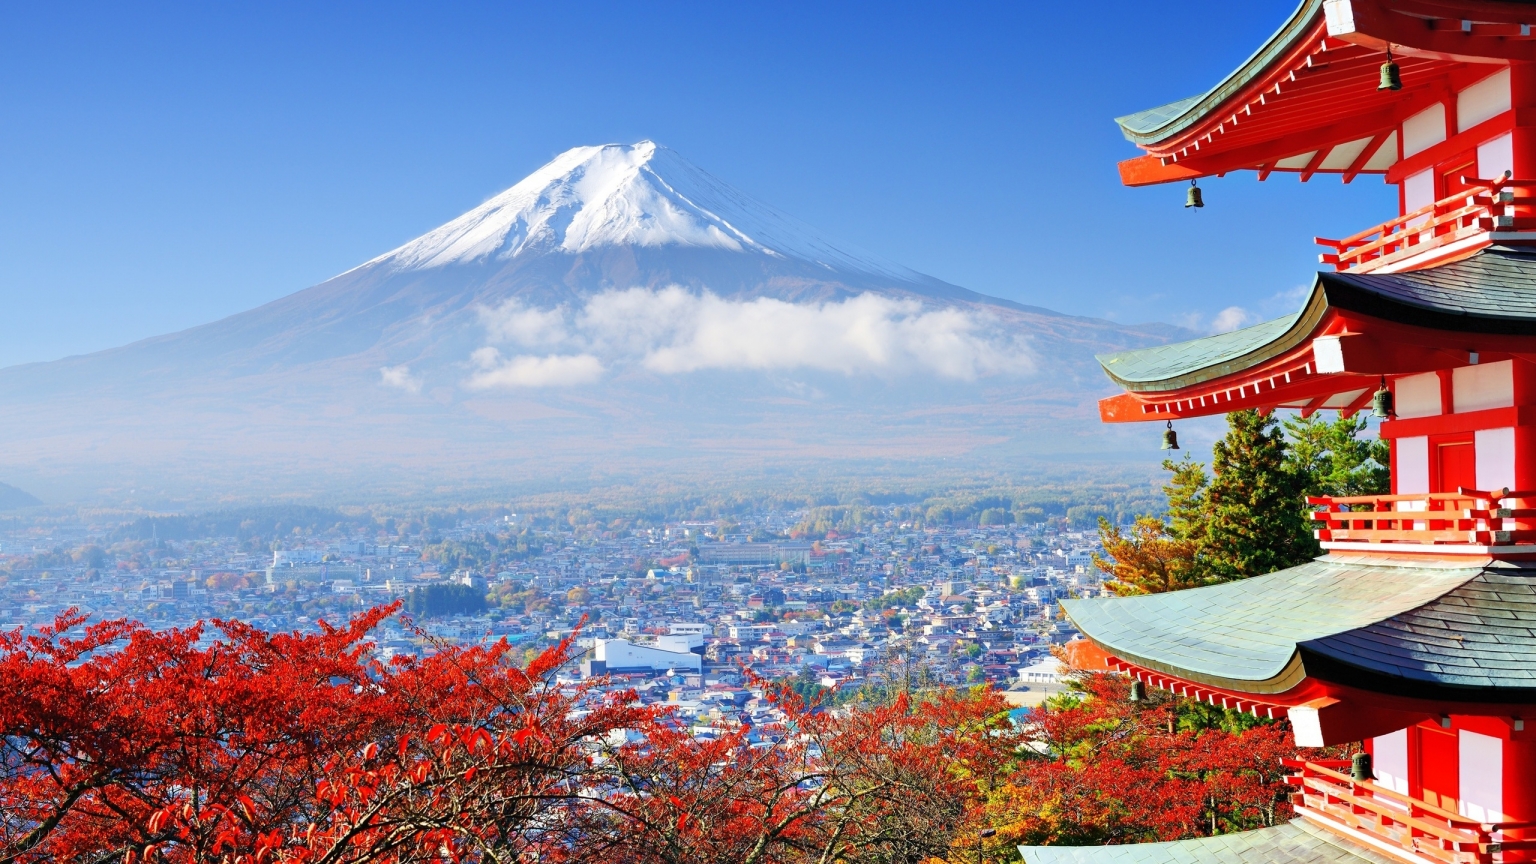 Fuji Mount in Japan for 1536 x 864 HDTV resolution